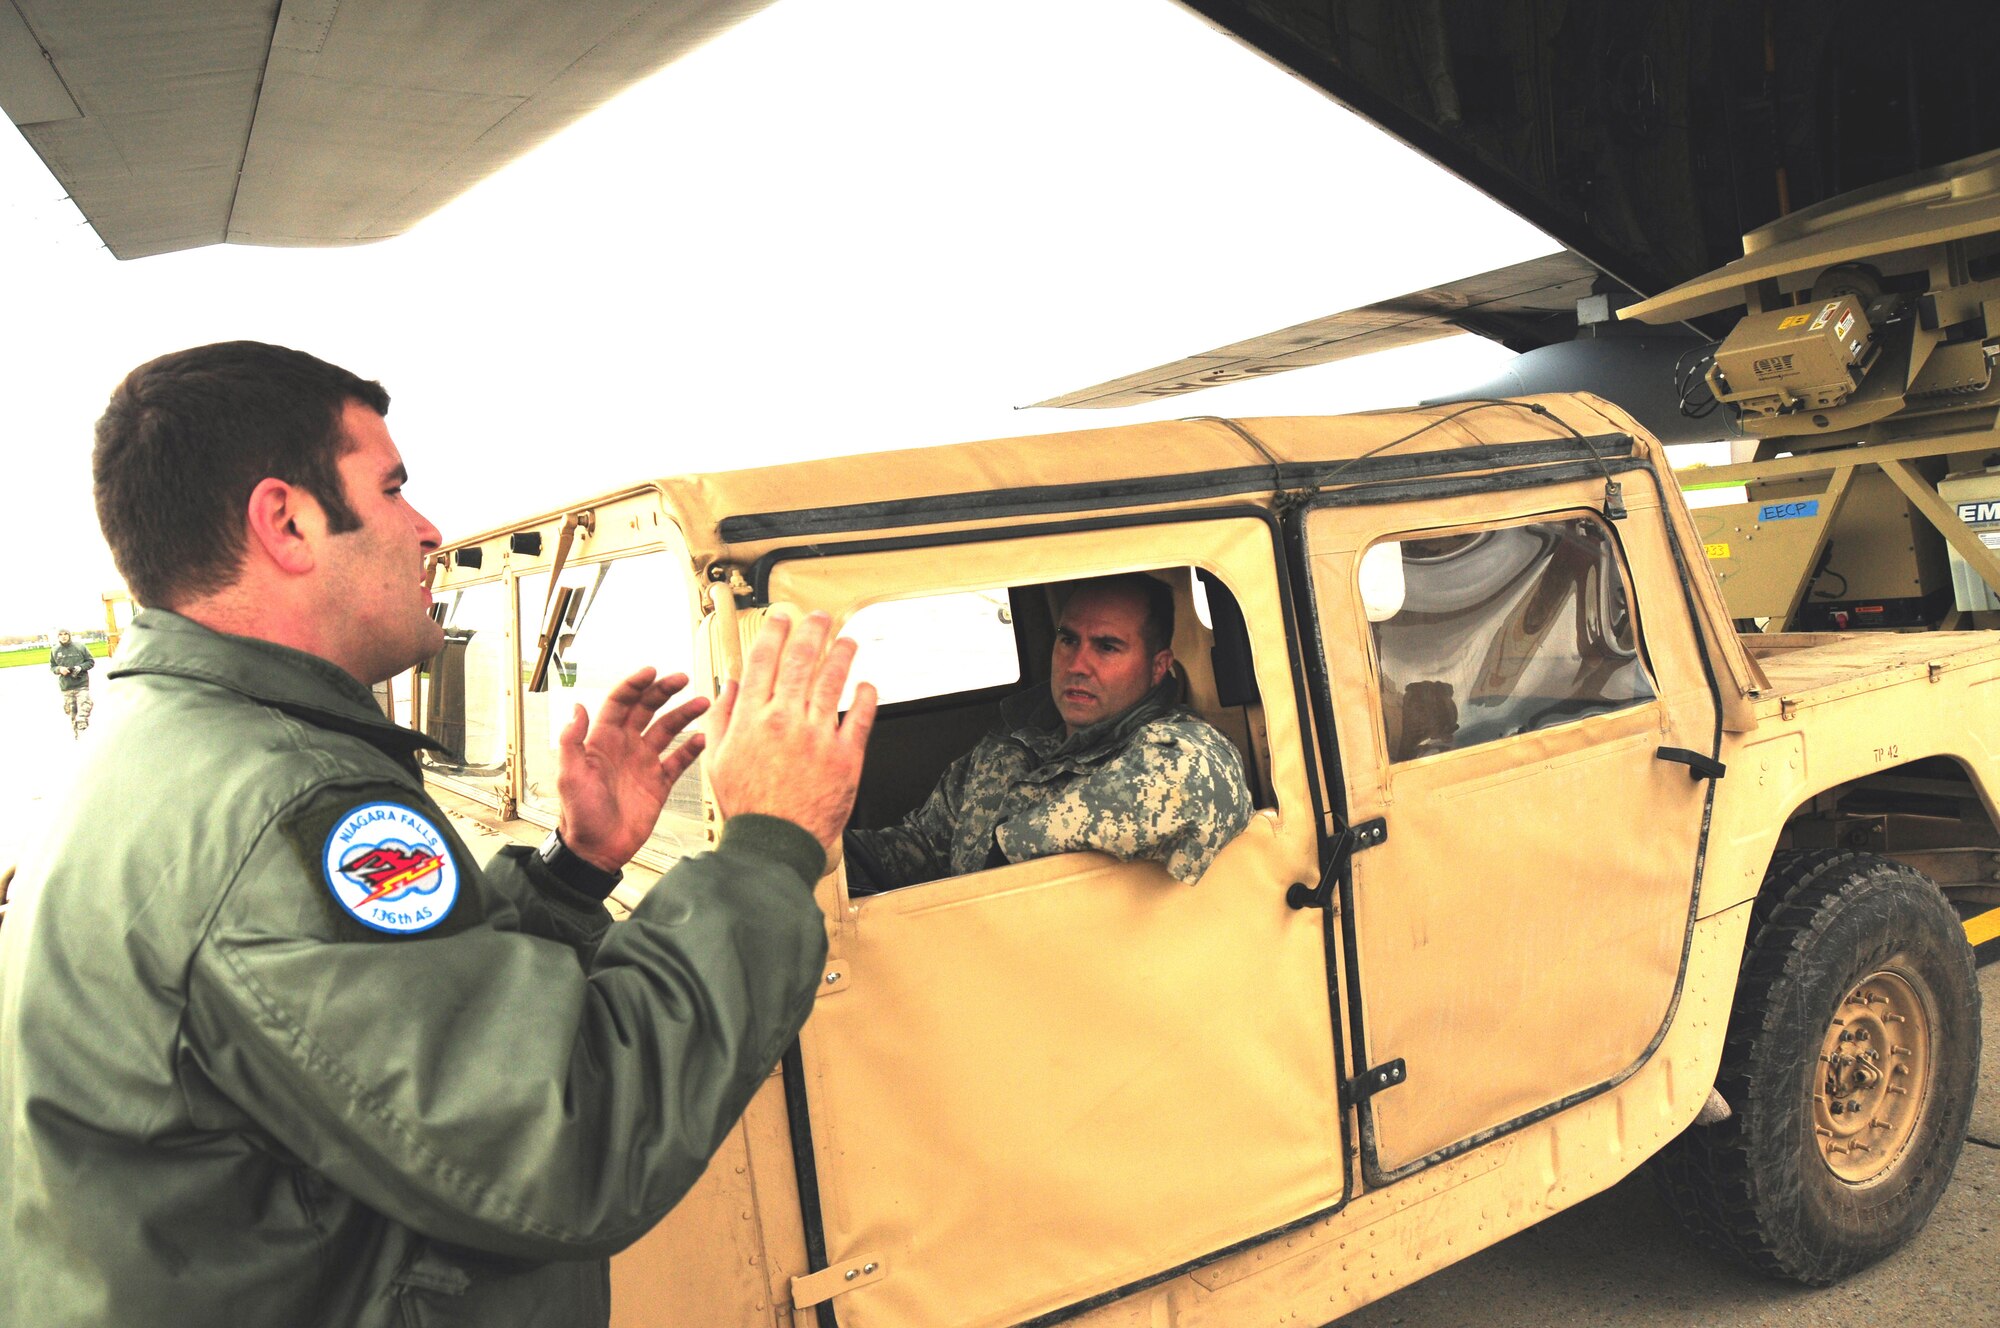 The Operational Company of the 42nd Infantry Division of the Army National Guard arrived ready to train with the 107th Airlift Wing's C-130 loadmasters. Senior Airman Babirad guides the AN/TSC-185 Satellite Vehicle onto the C-130 aircraft. Army Guard Sgt. 1st Class Anzalone is  behind the wheel of the HMMWV.
Oct. 20, 2012 (U.S. Air Force Photo/Senior Master Sgt. Ray Lloyd)
